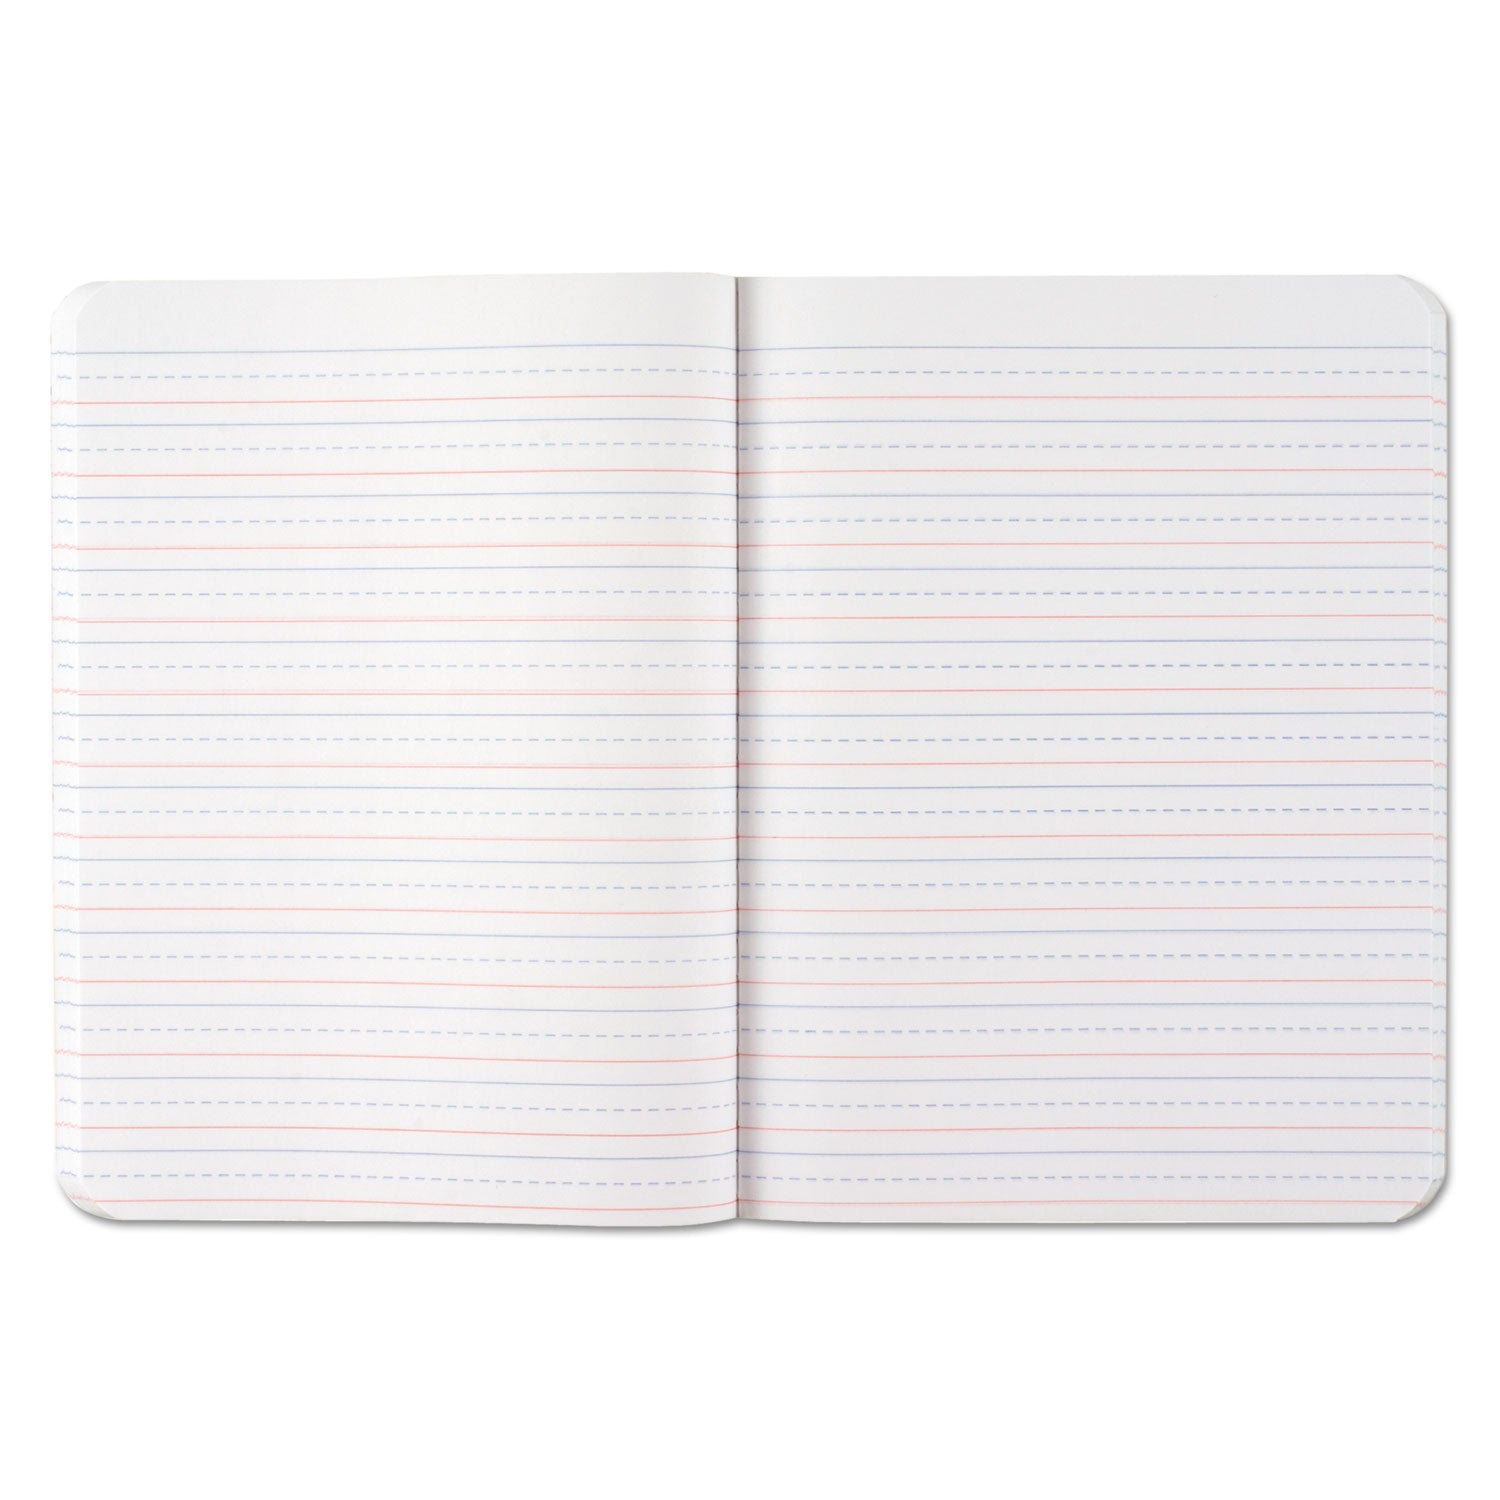 primary-composition-book-manuscript-format-blue-white-cover-100-975-x-75-sheets_mea09902 - 2